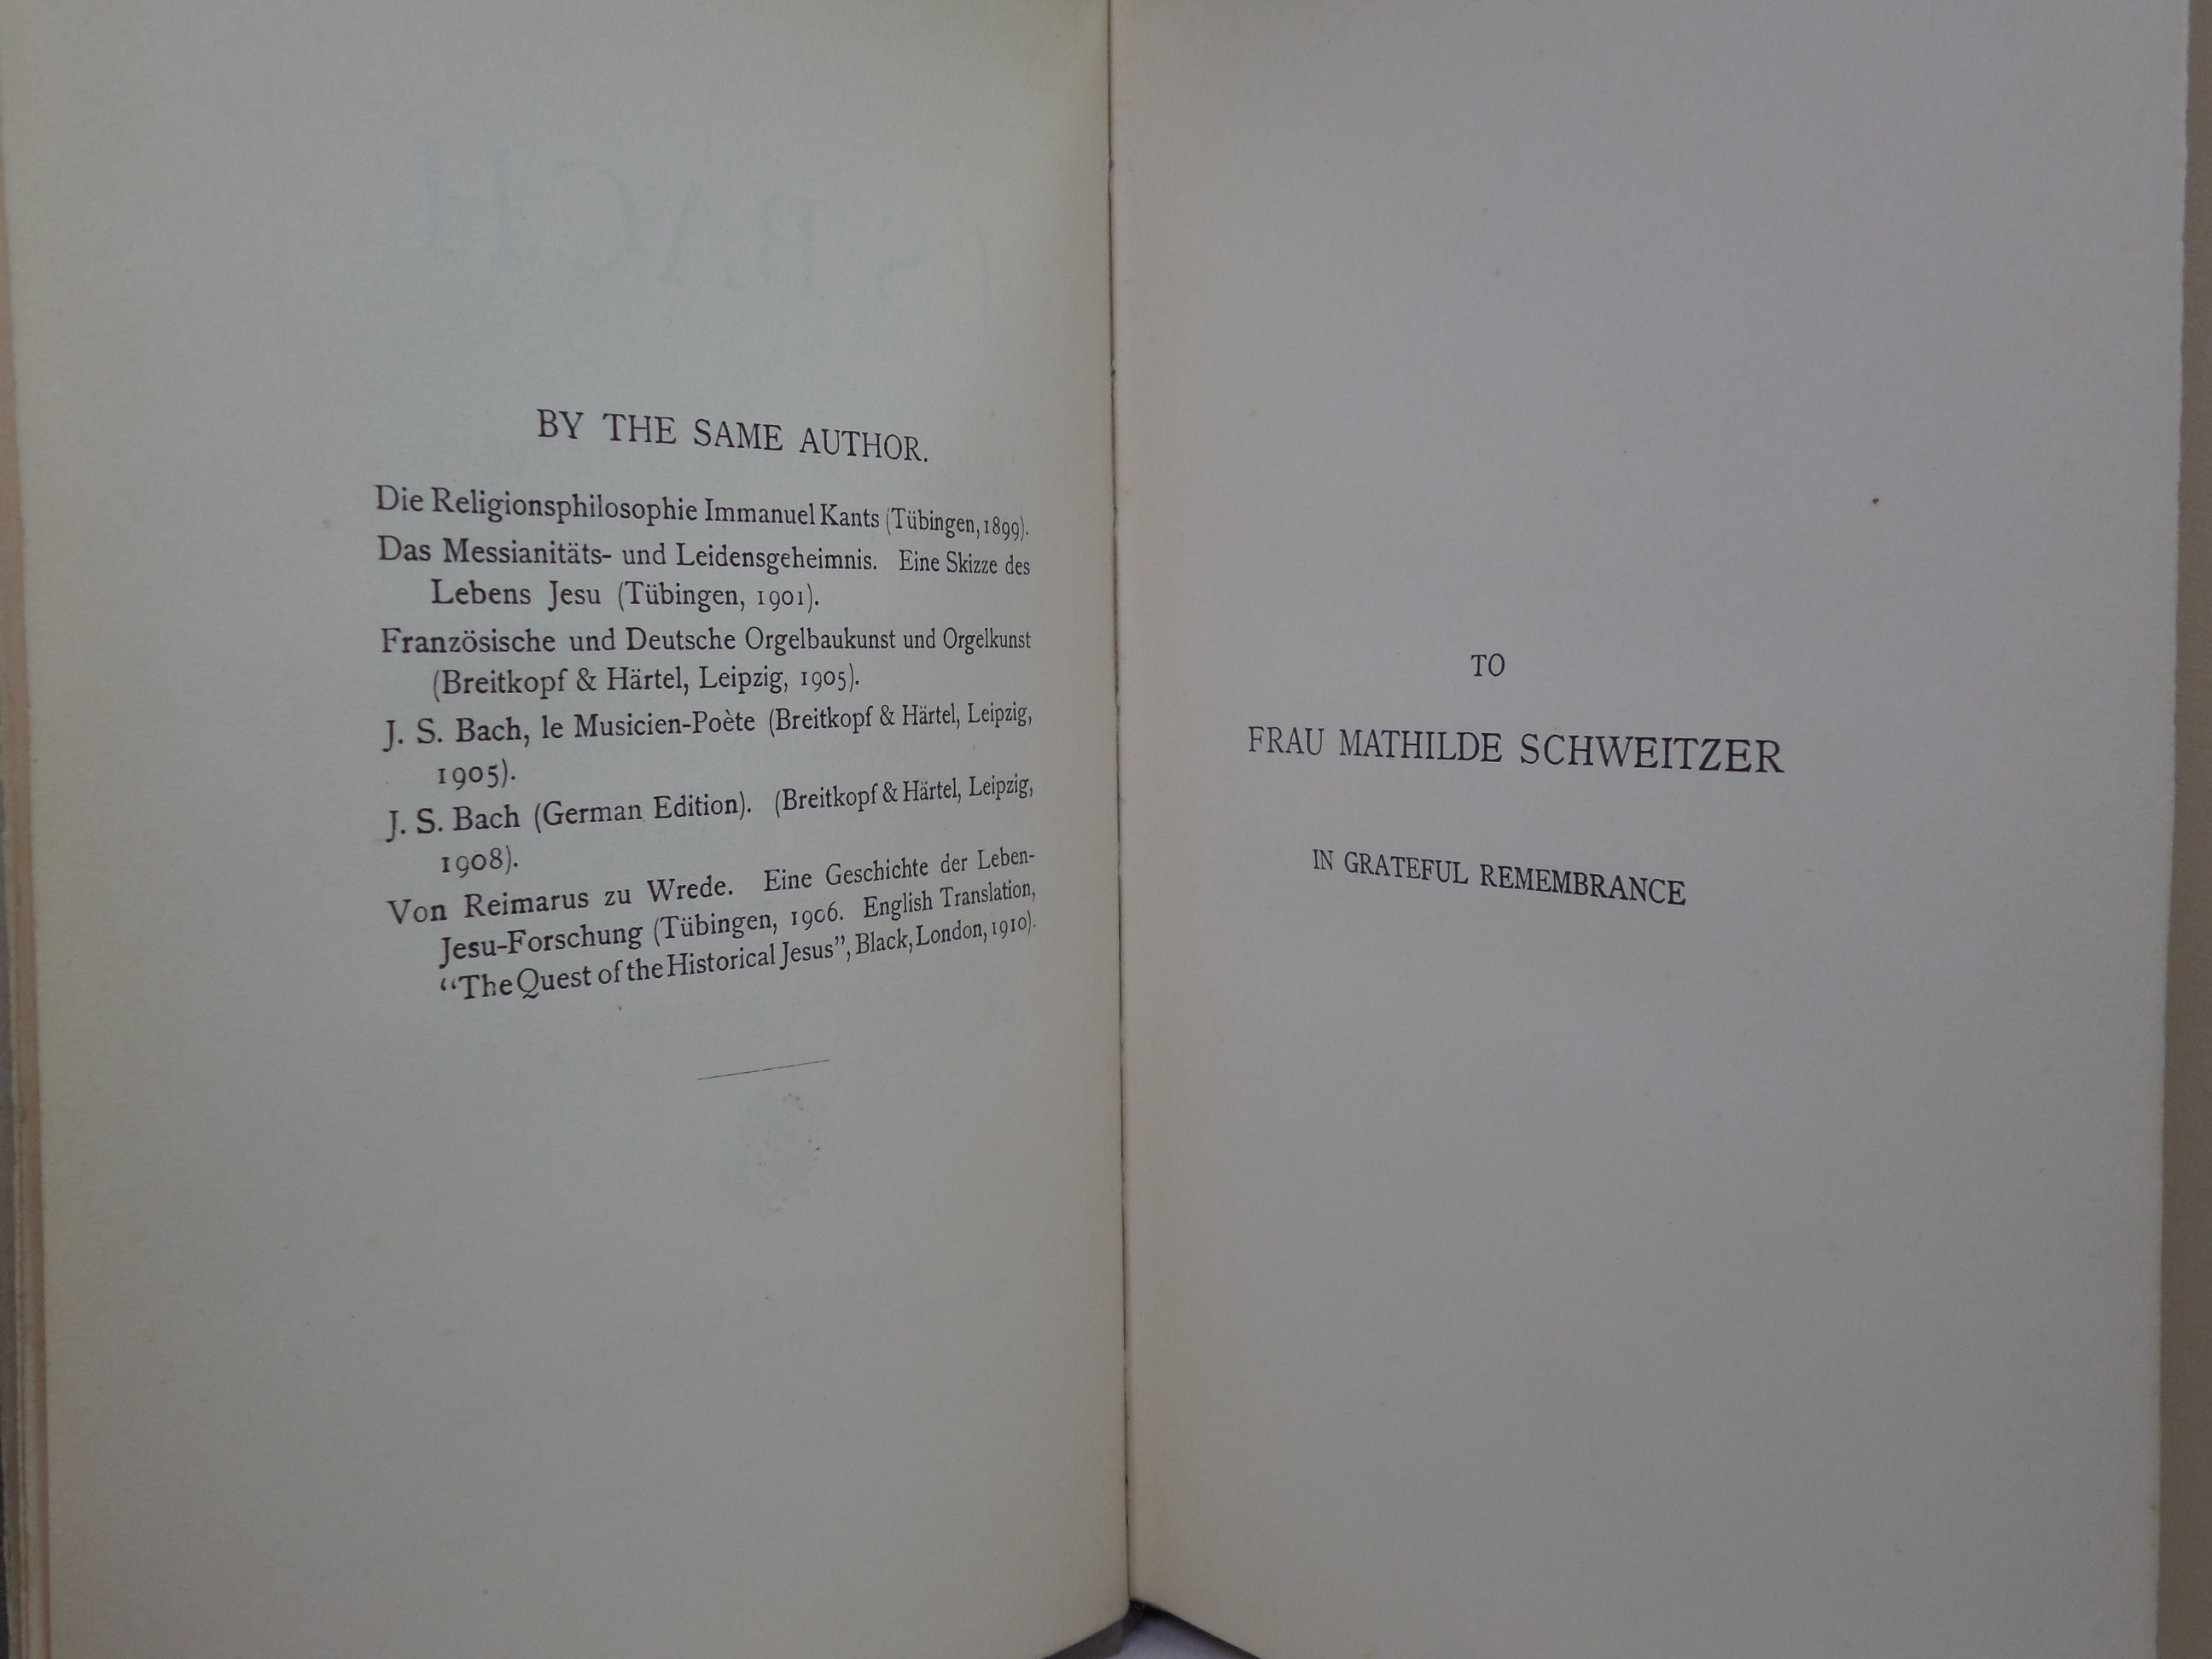 J.S. BACH BY ALBERT SCHWEITZER 1911 FIRST ENGLISH EDITION IN TWO VOLUMES